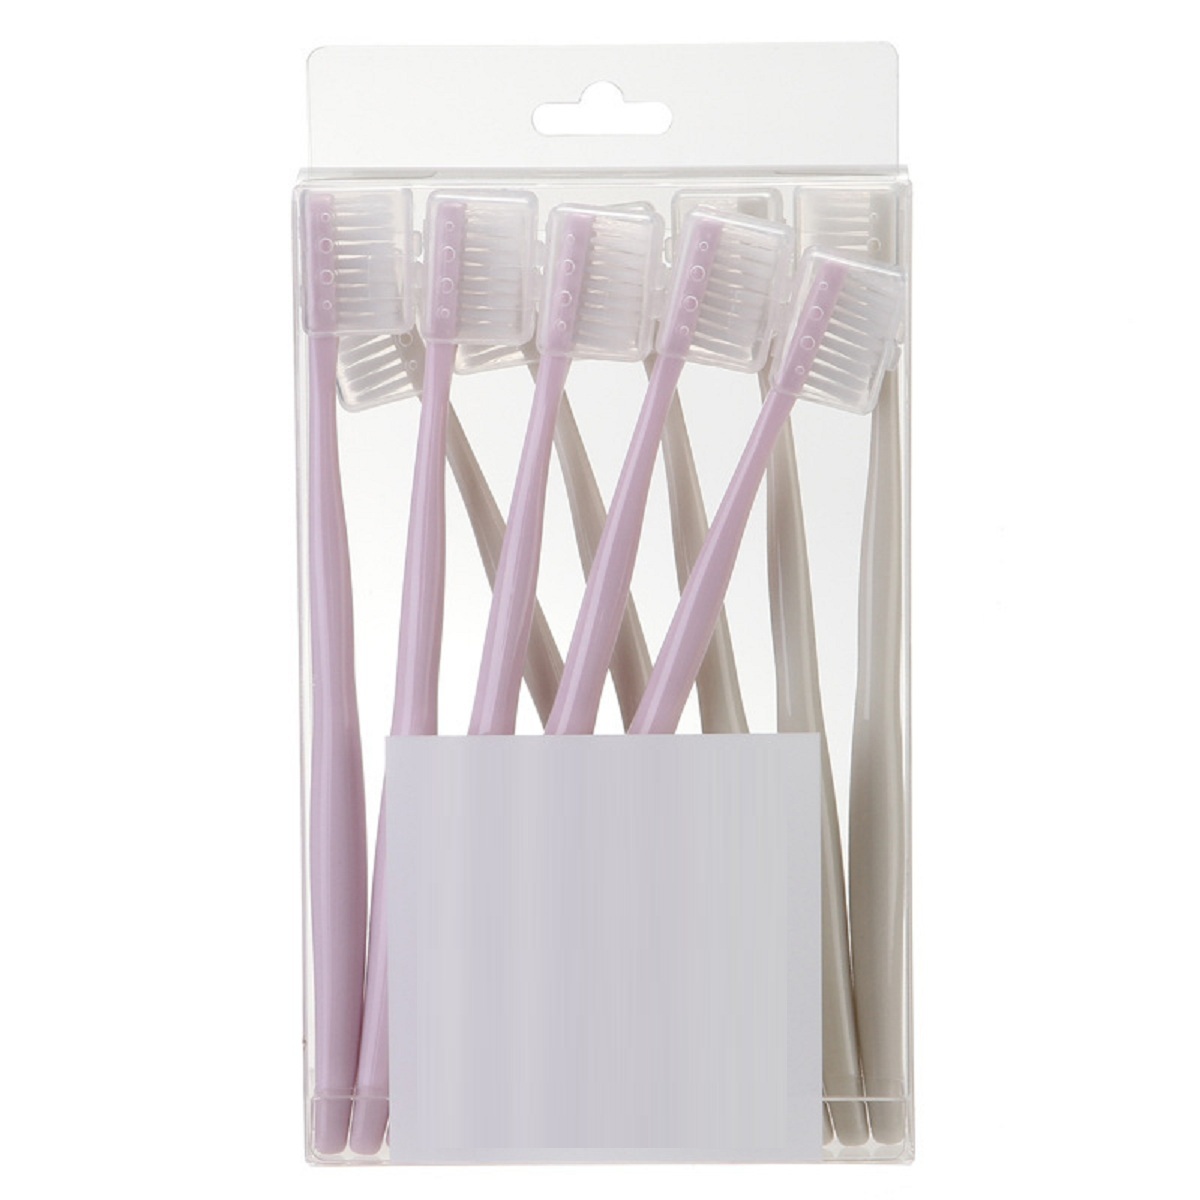 

Fitline 10 psc Soft Hair Small Head Macarone Toothbrush Manual Toothbrush Soft Hair Toothbrush Beige & Pink